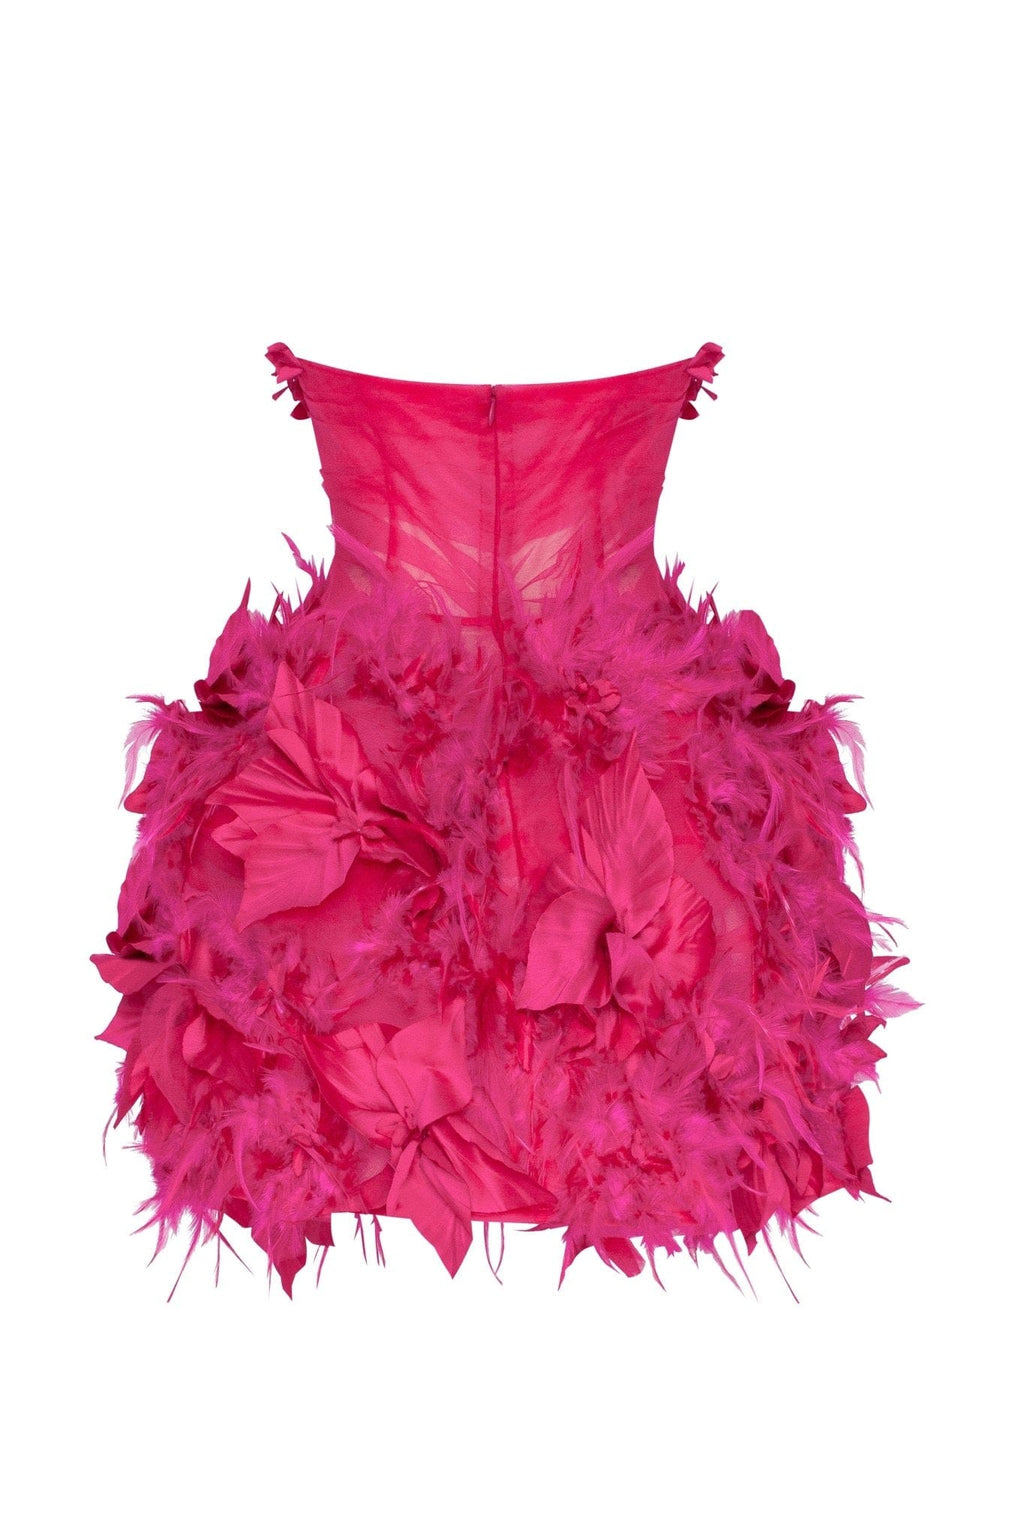 Epic fuchsia tulle mini dress with floral and feather aplication - Milla